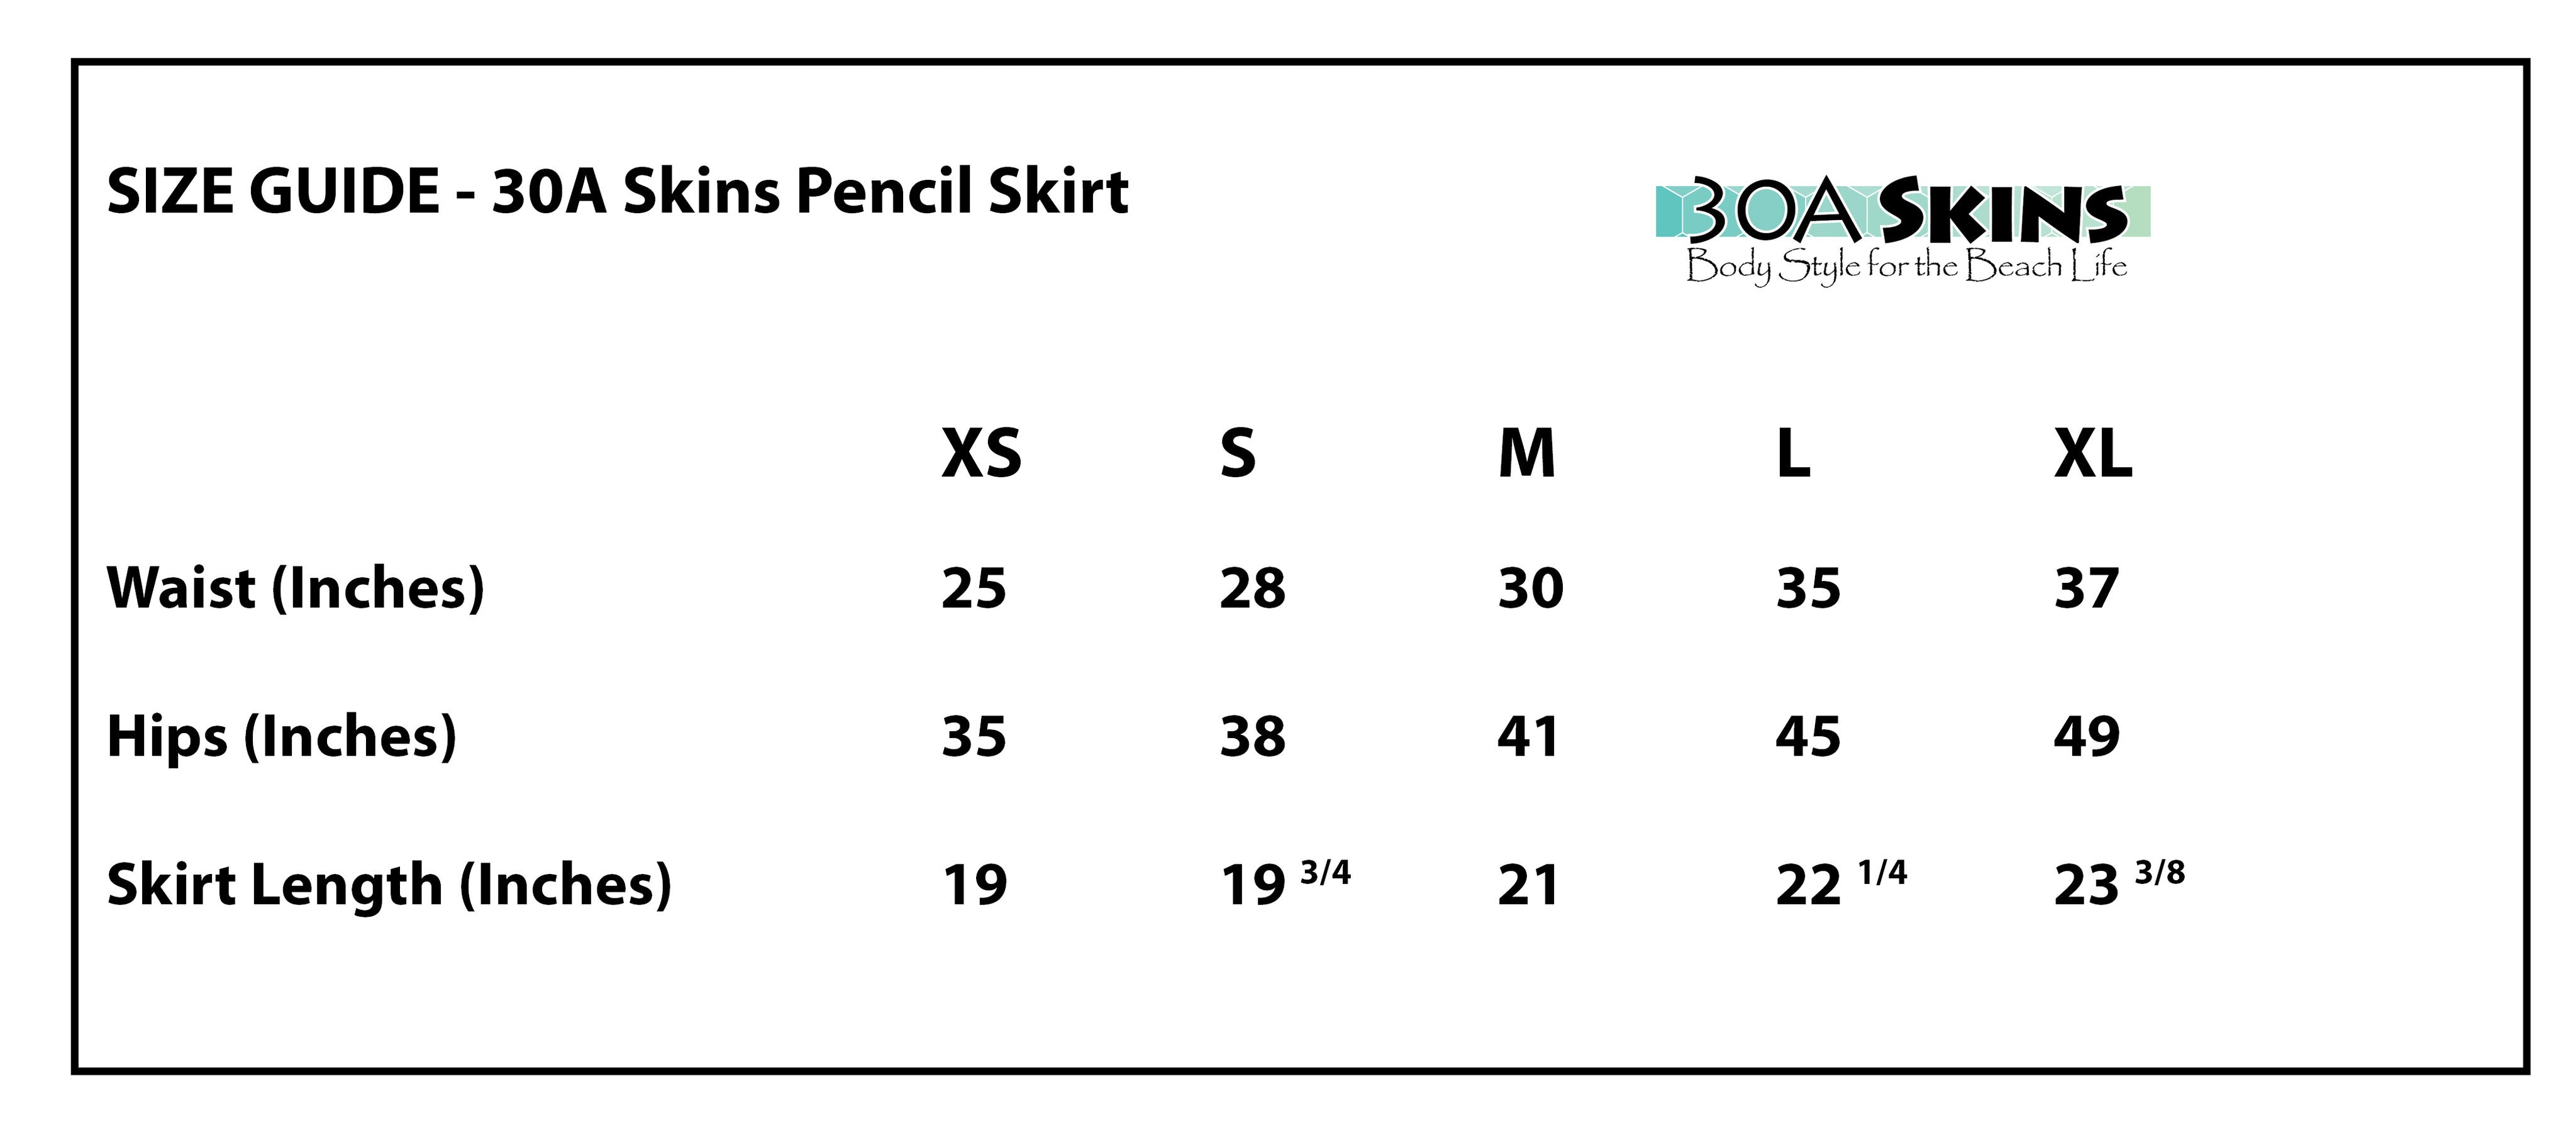 30a skins pencil skirt sizing guide